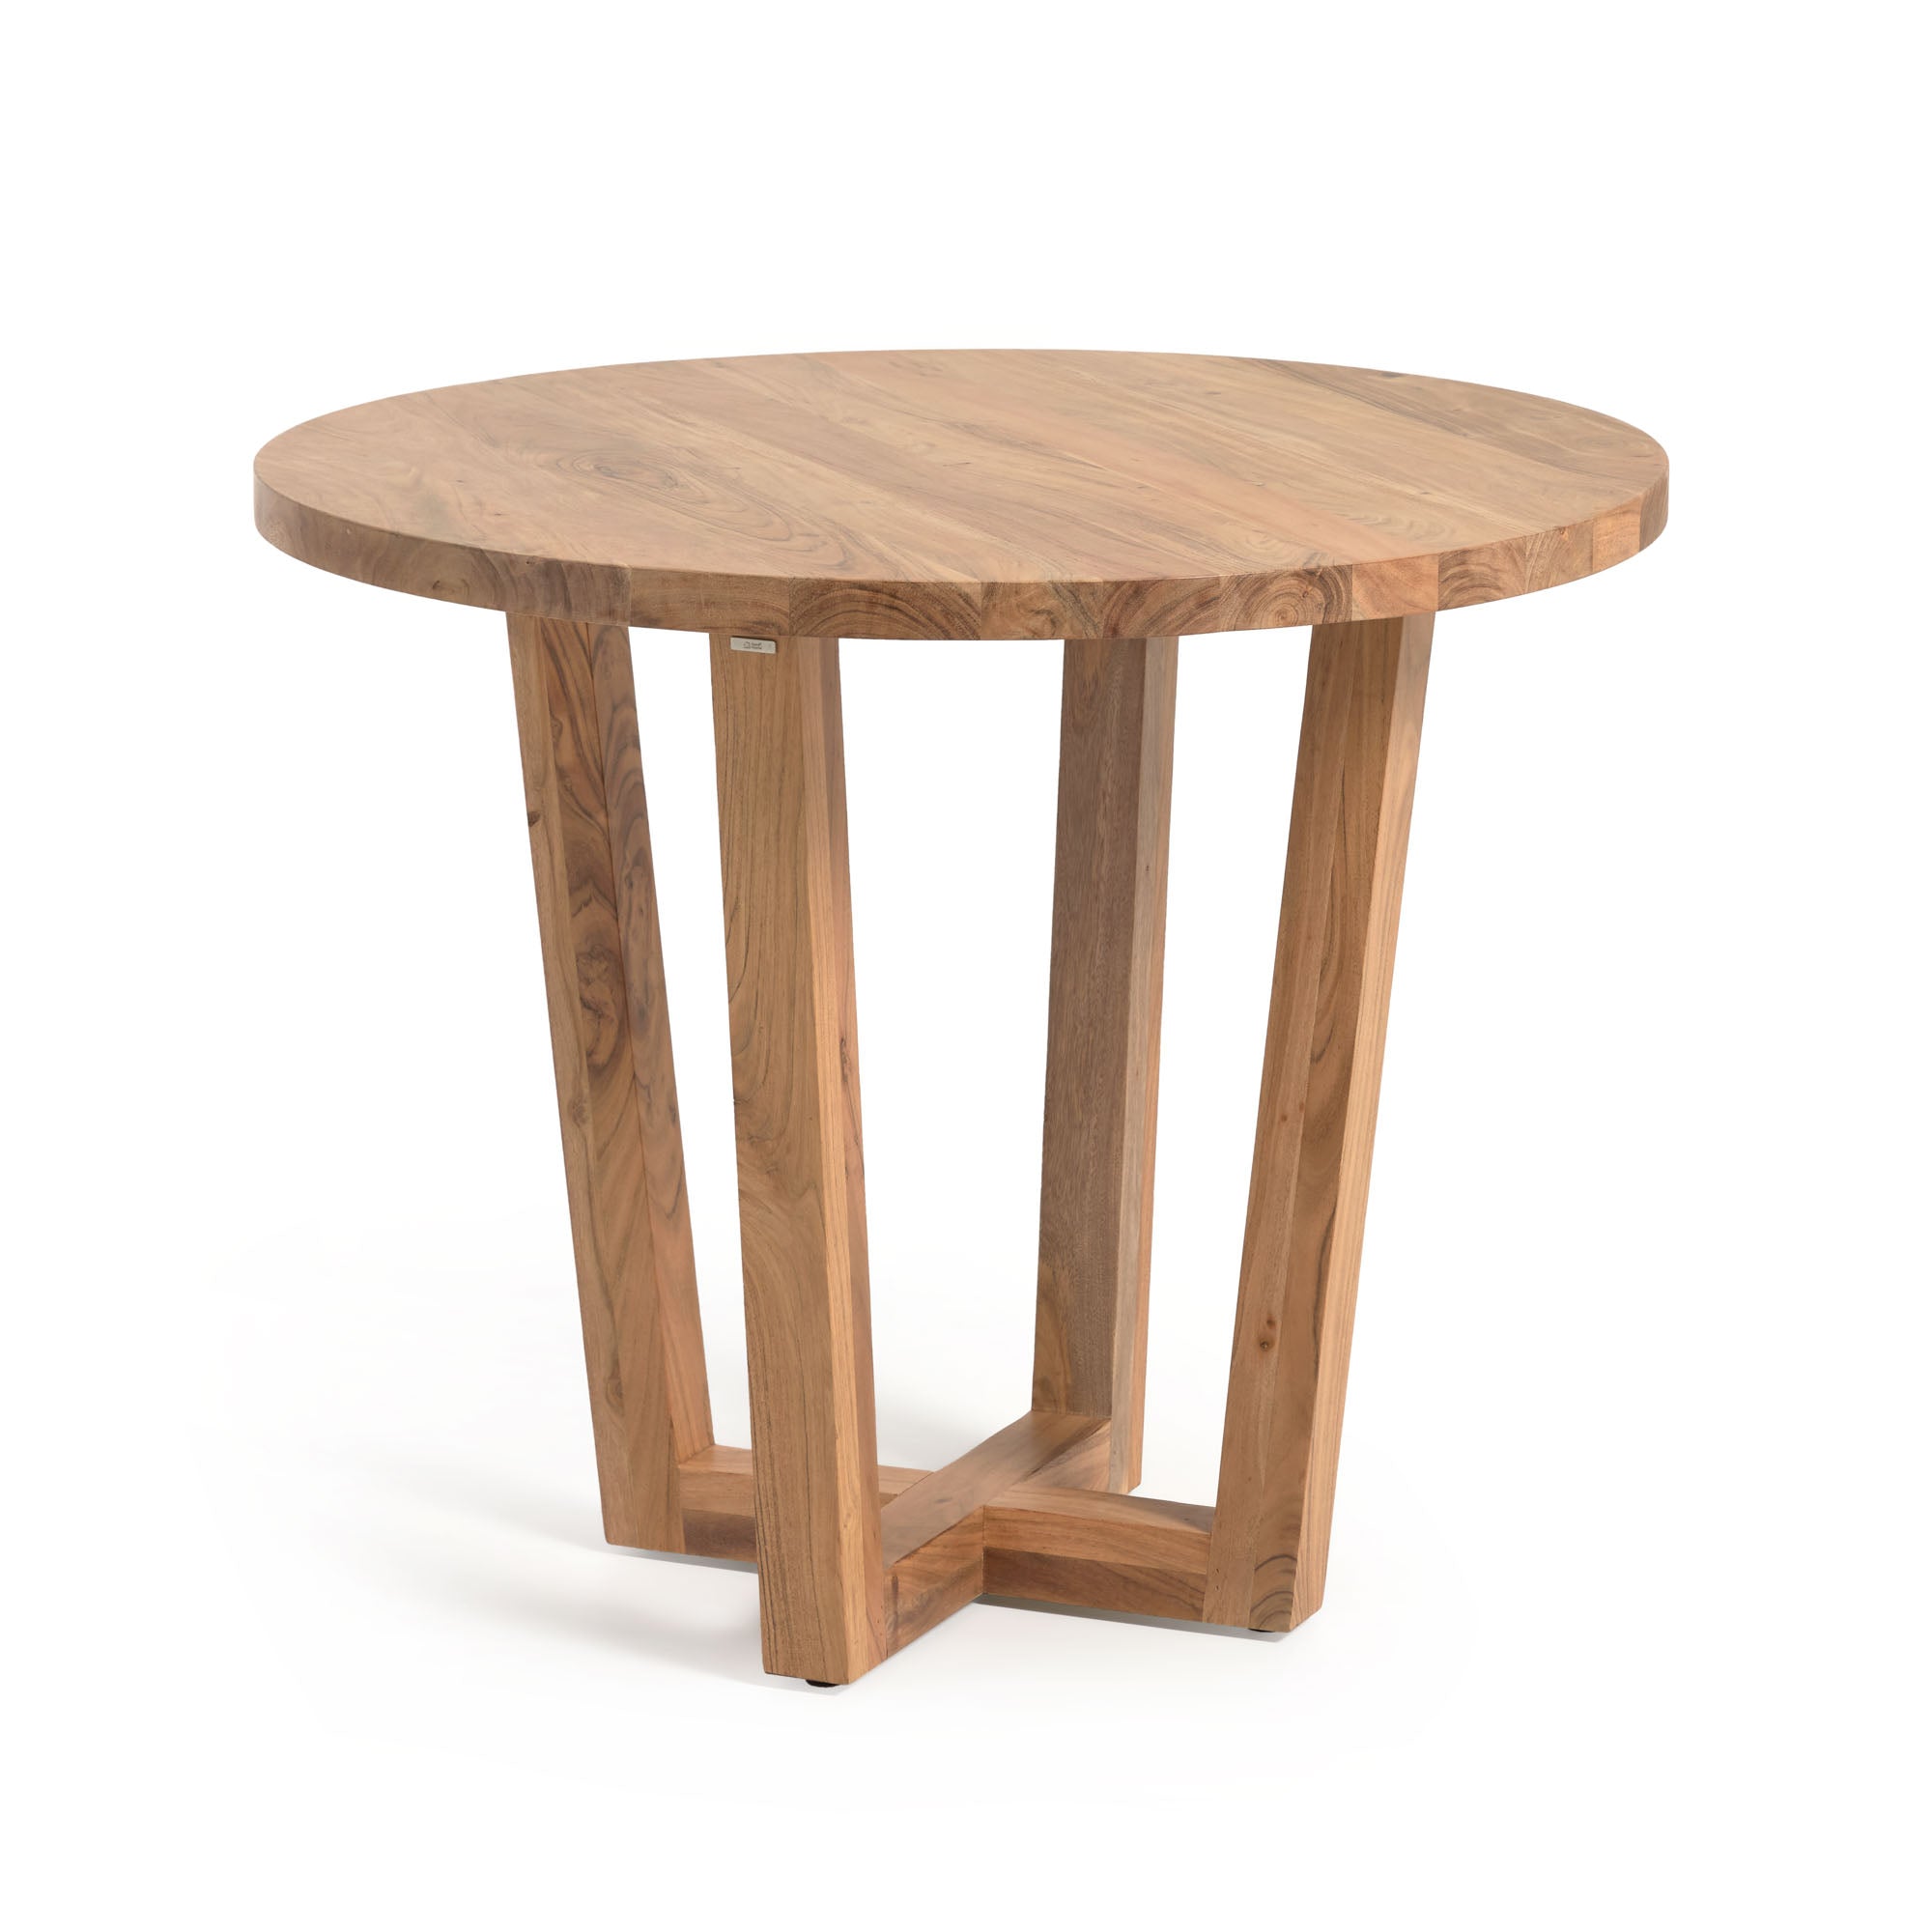 Nahla round table made from solid acacia wood with natural finish Ø 90 cm